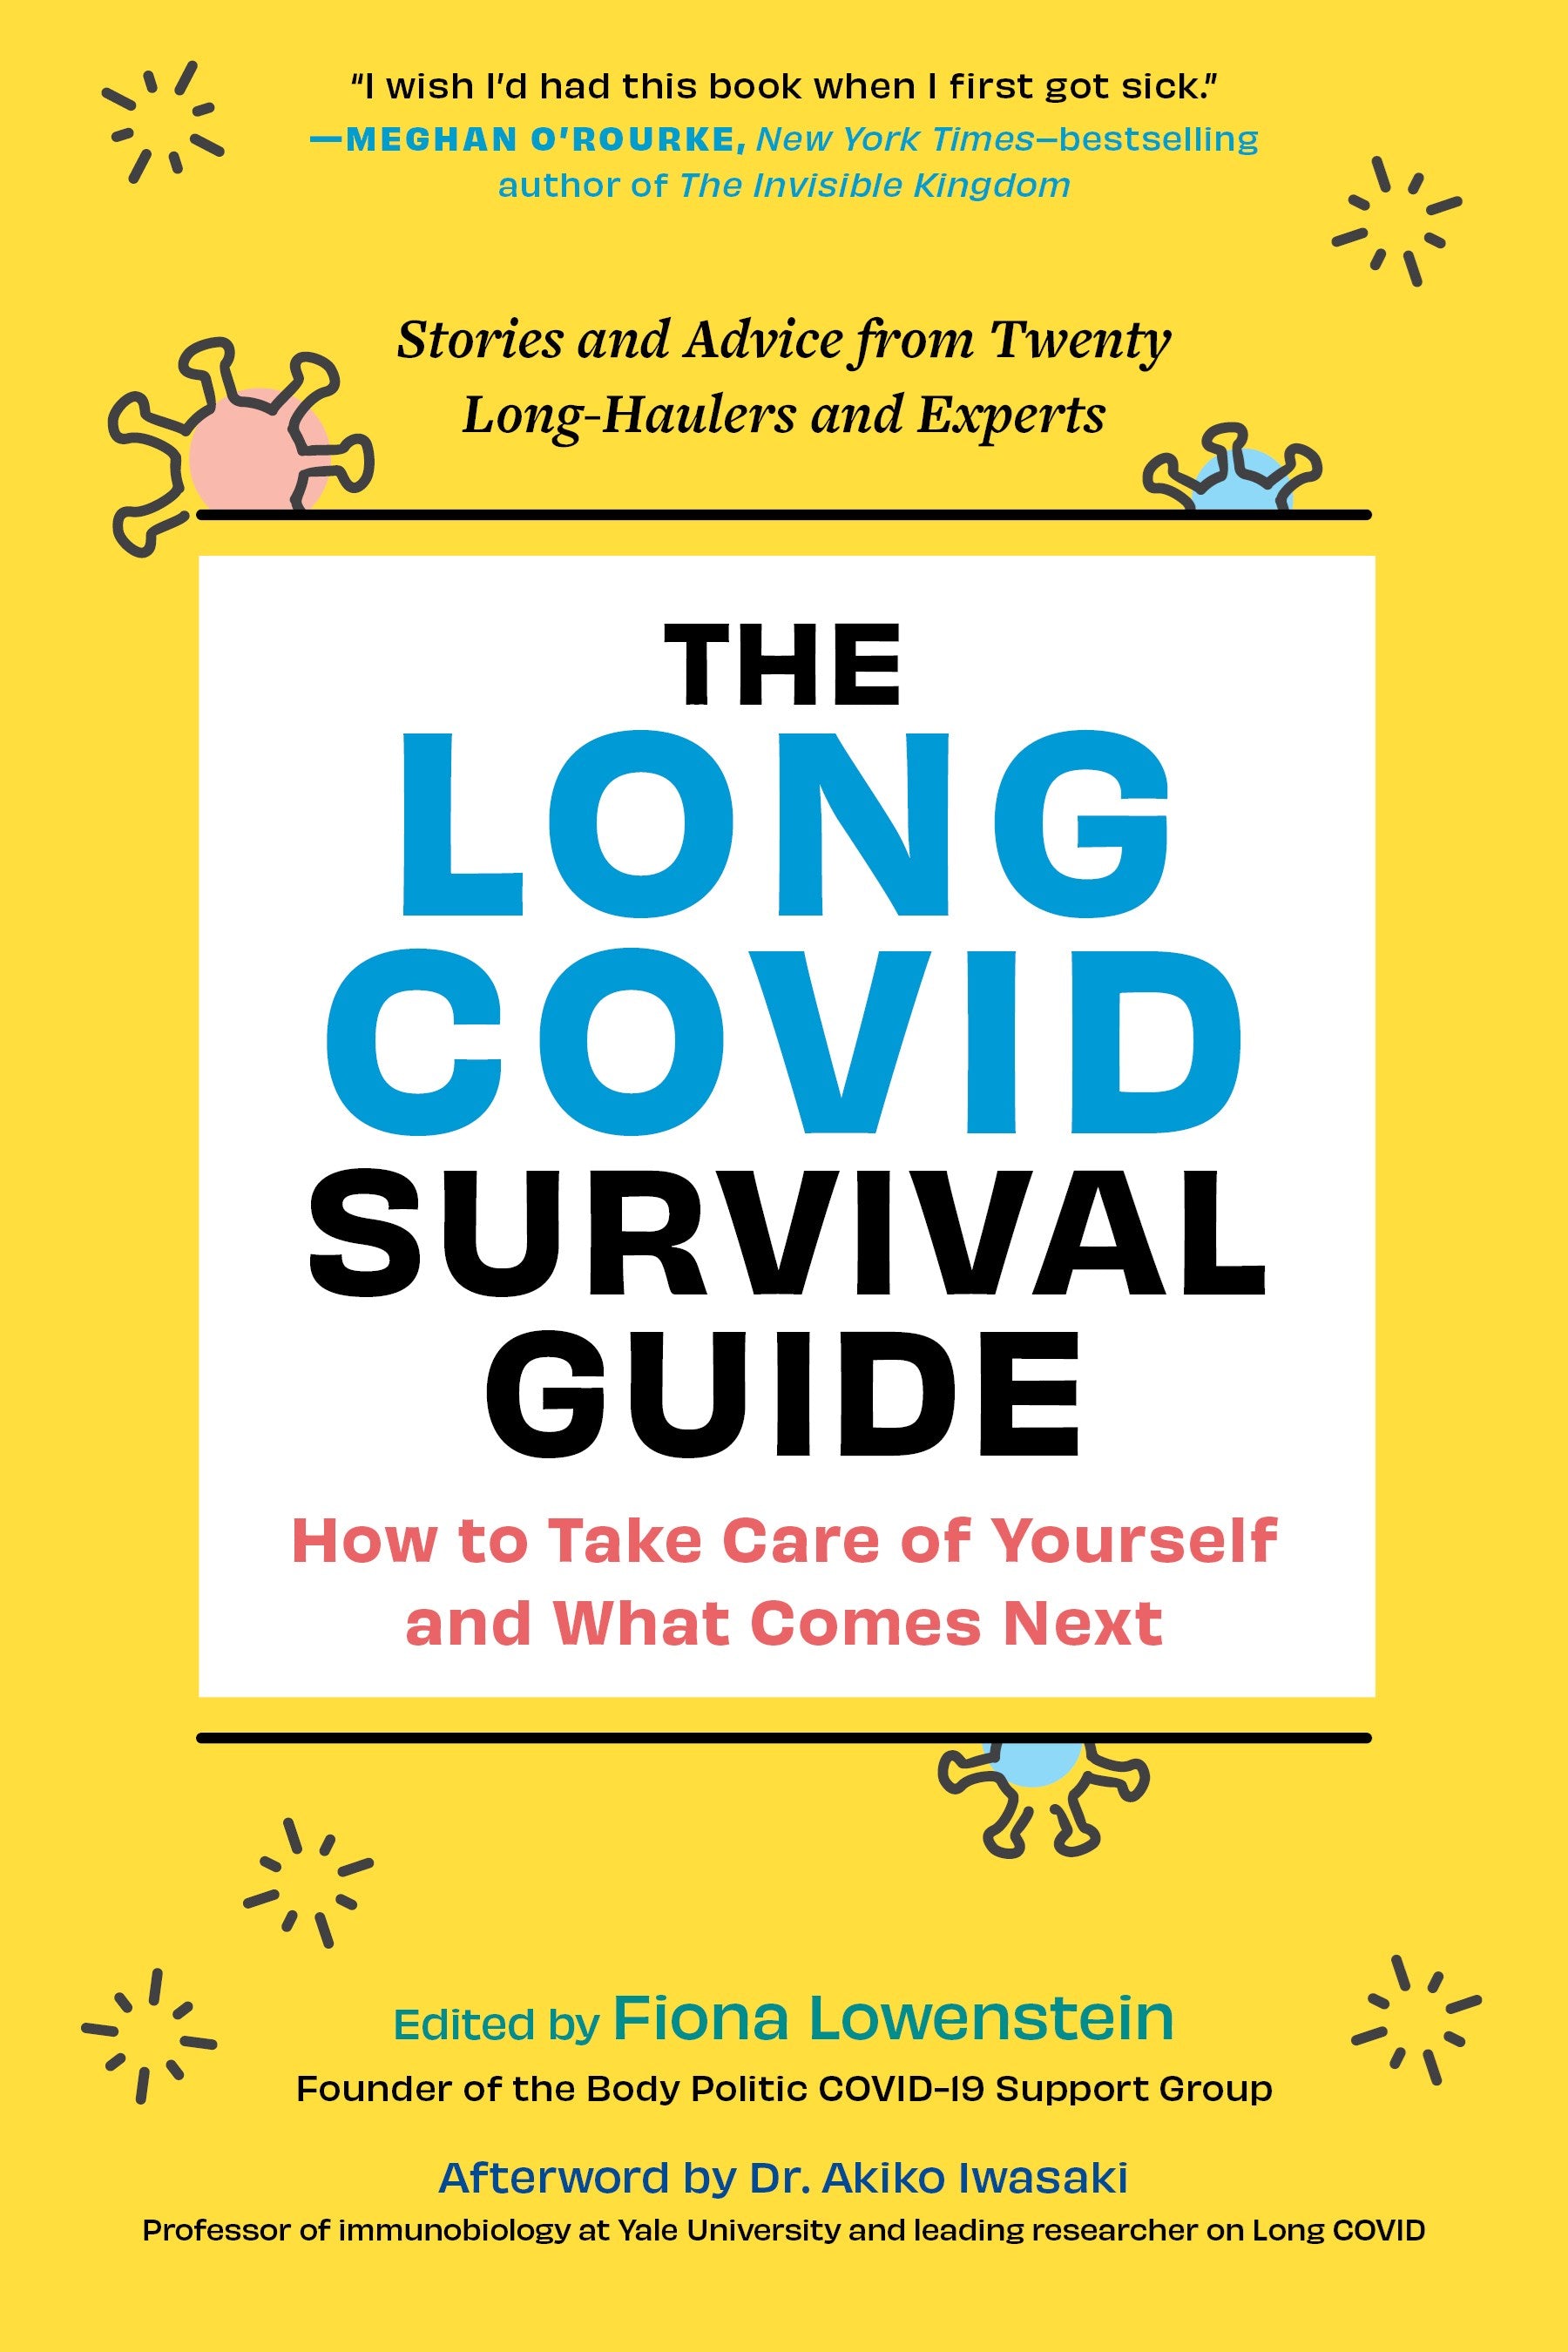 The Long COVID Survival Guide: How to Take Care of Yourself and What Comes Next—Stories and Advice from Twenty Long-Haulers and Experts